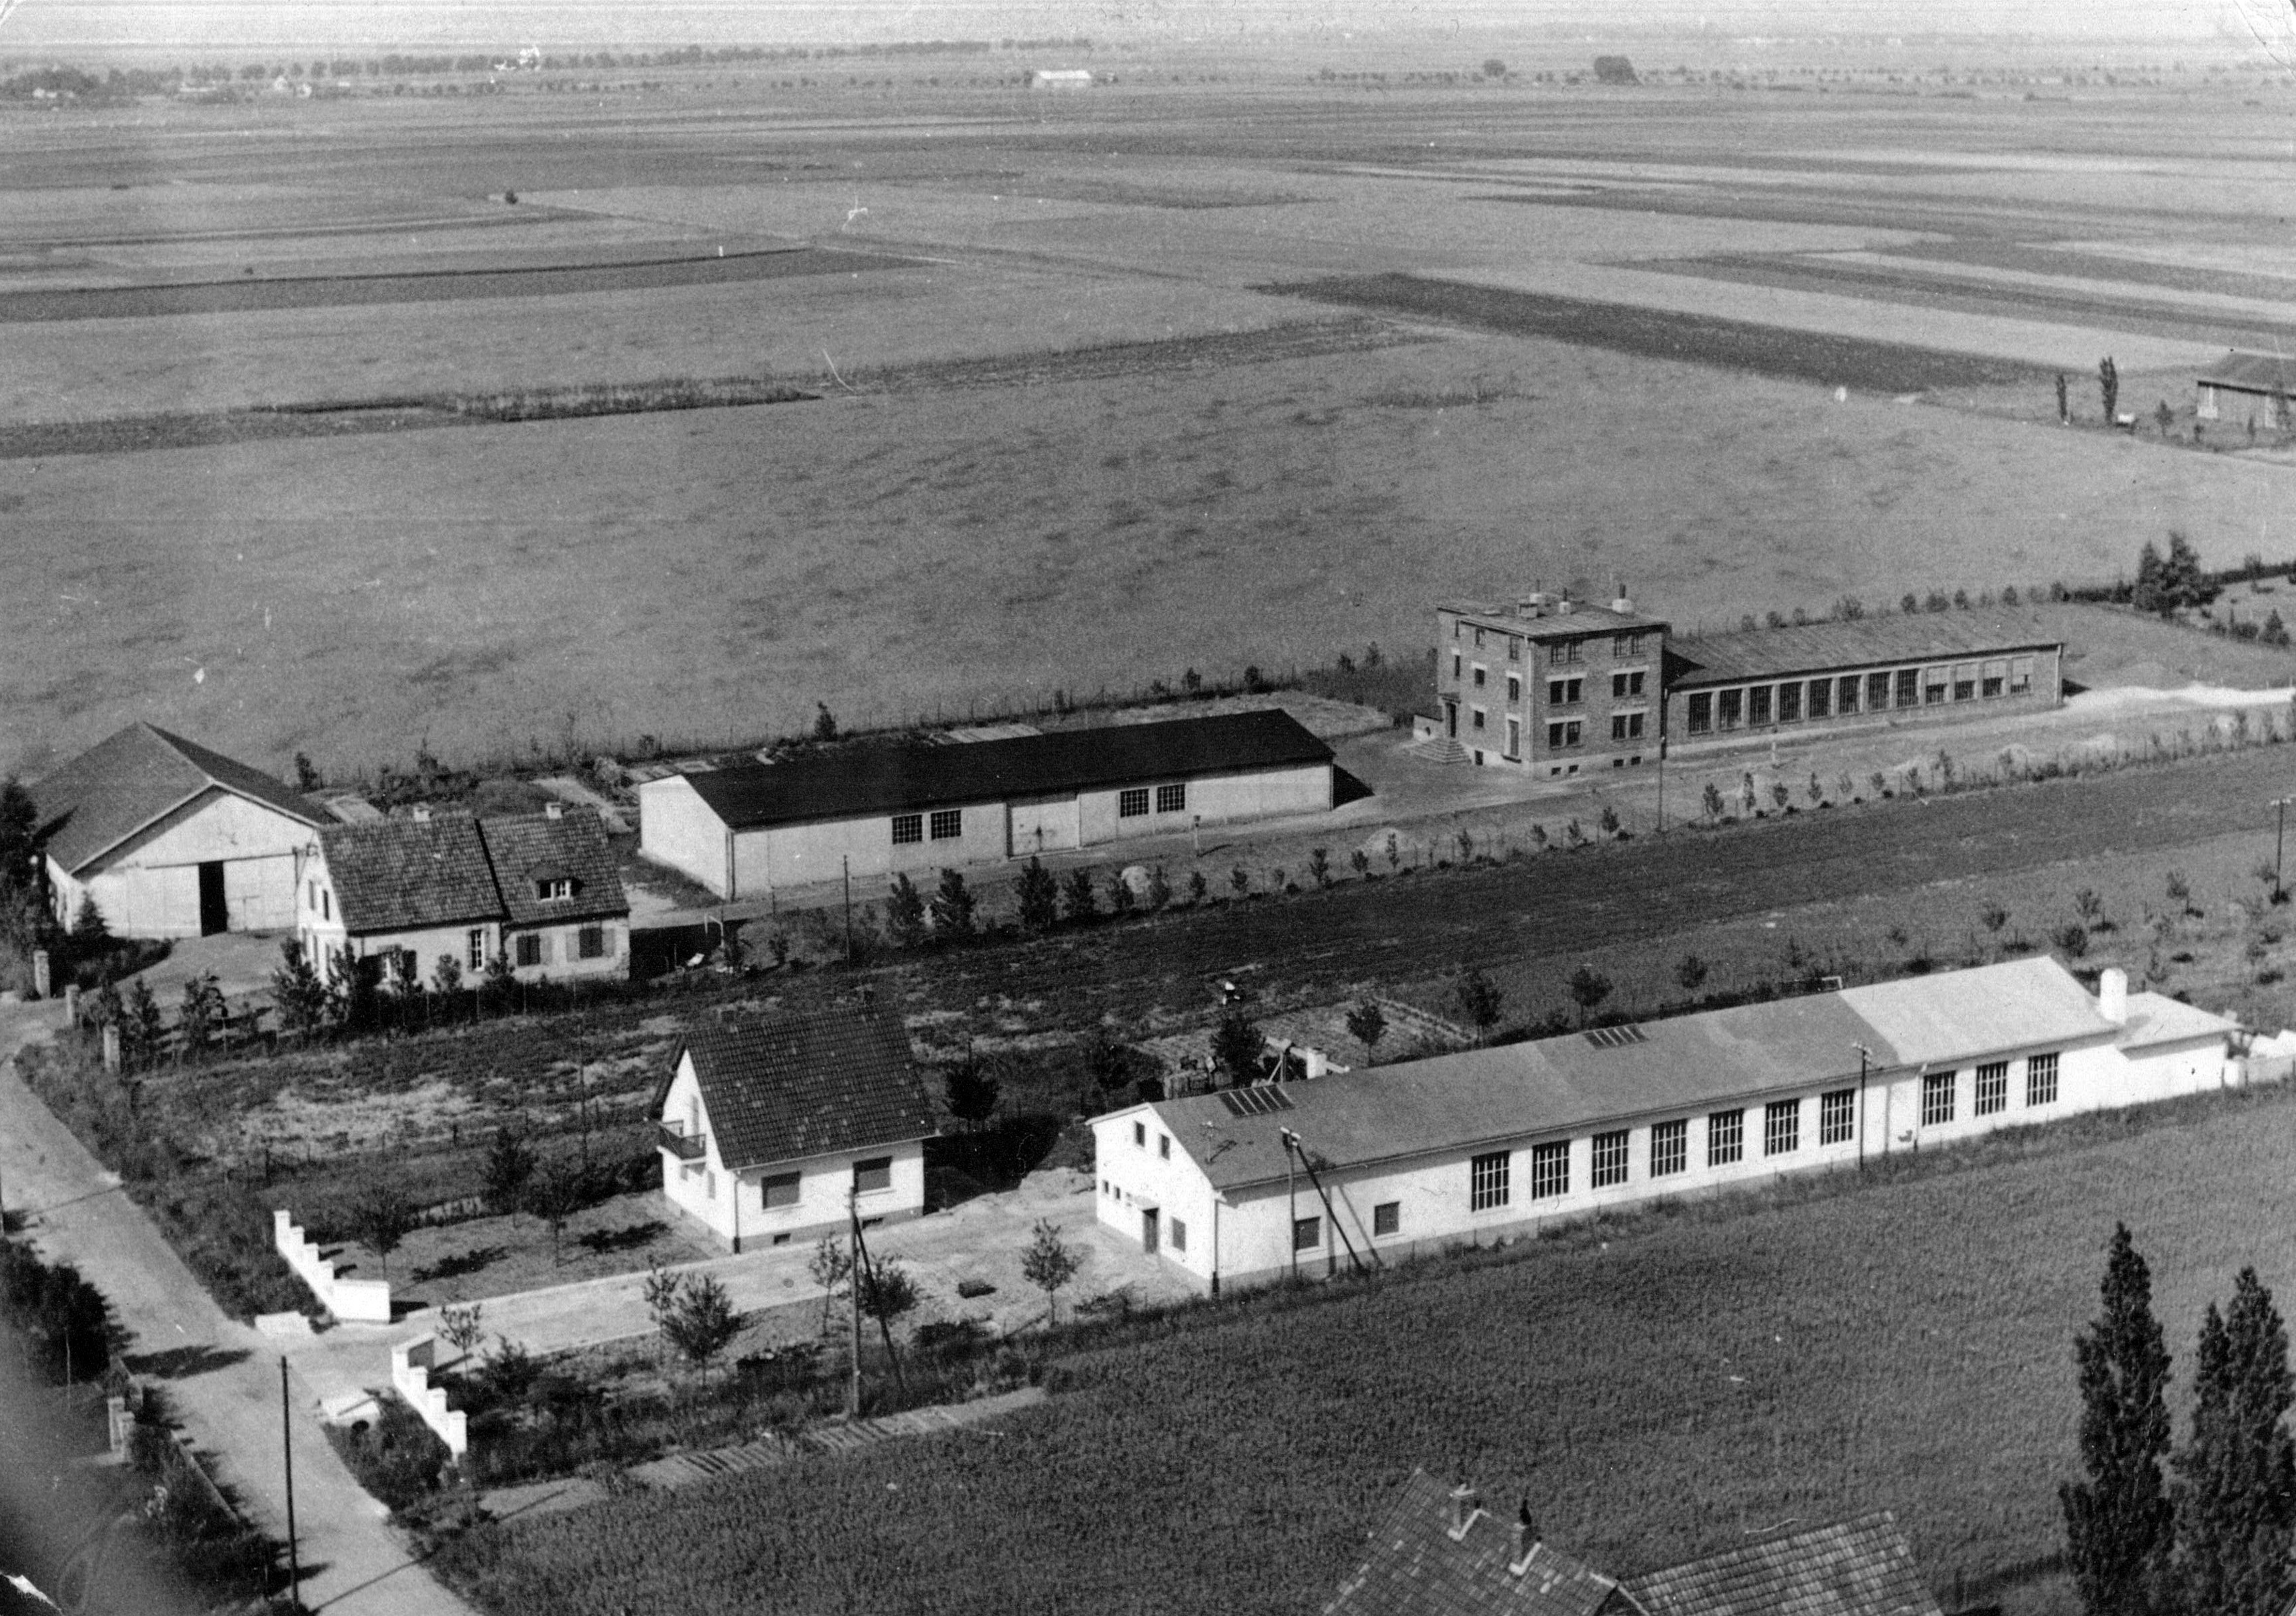 The production facility of Bungartz centrifugal pumps when it first opened, 70 years ago.